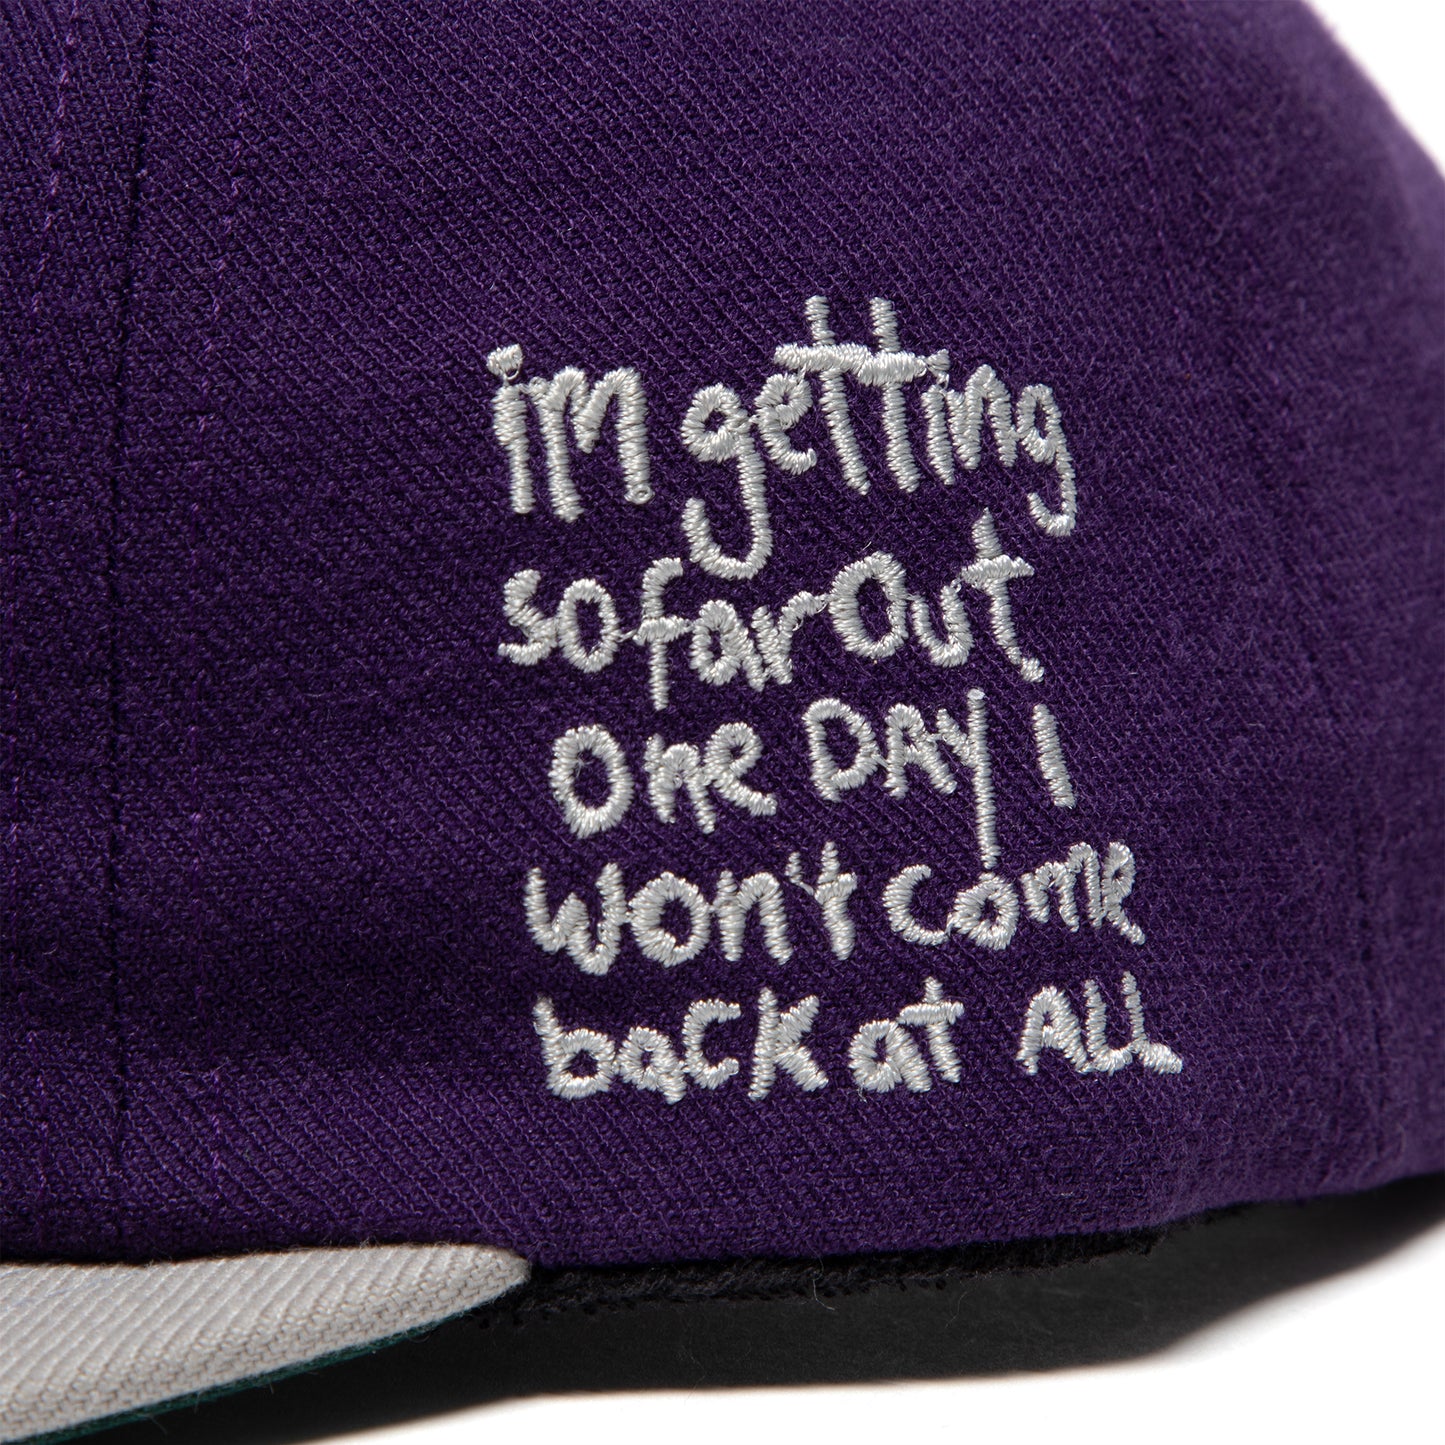 Real Bad Man So Far Out 6 Panel Hat (Purple/Gray)